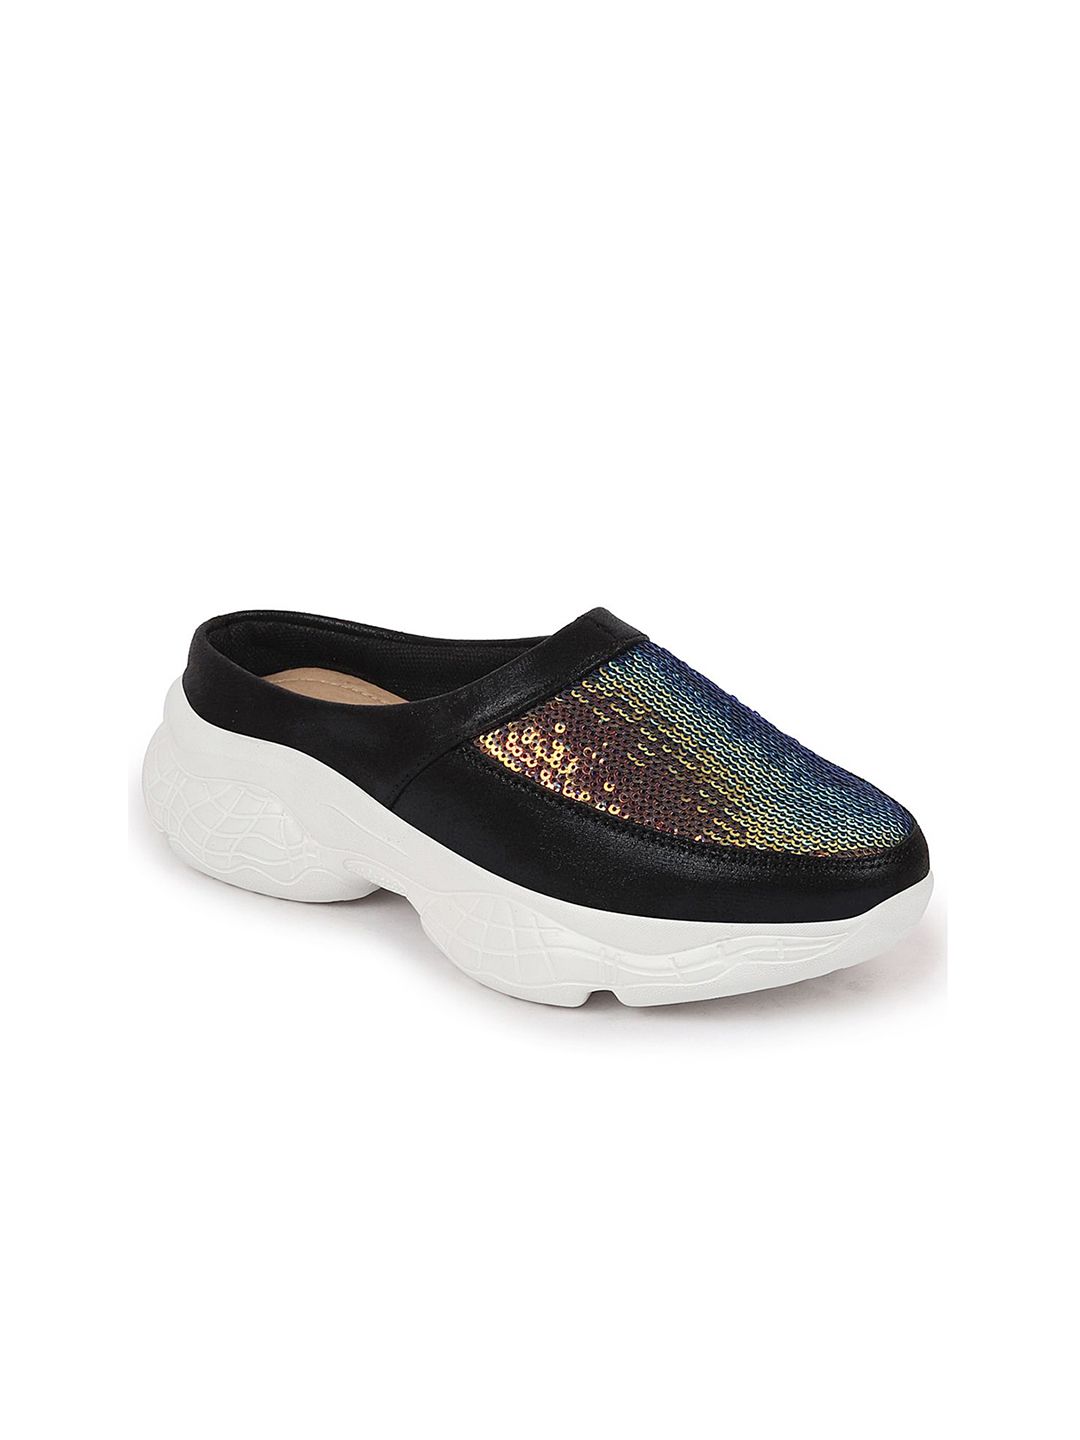 FAUSTO Women Black Embellished Slip-On Sneakers Price in India